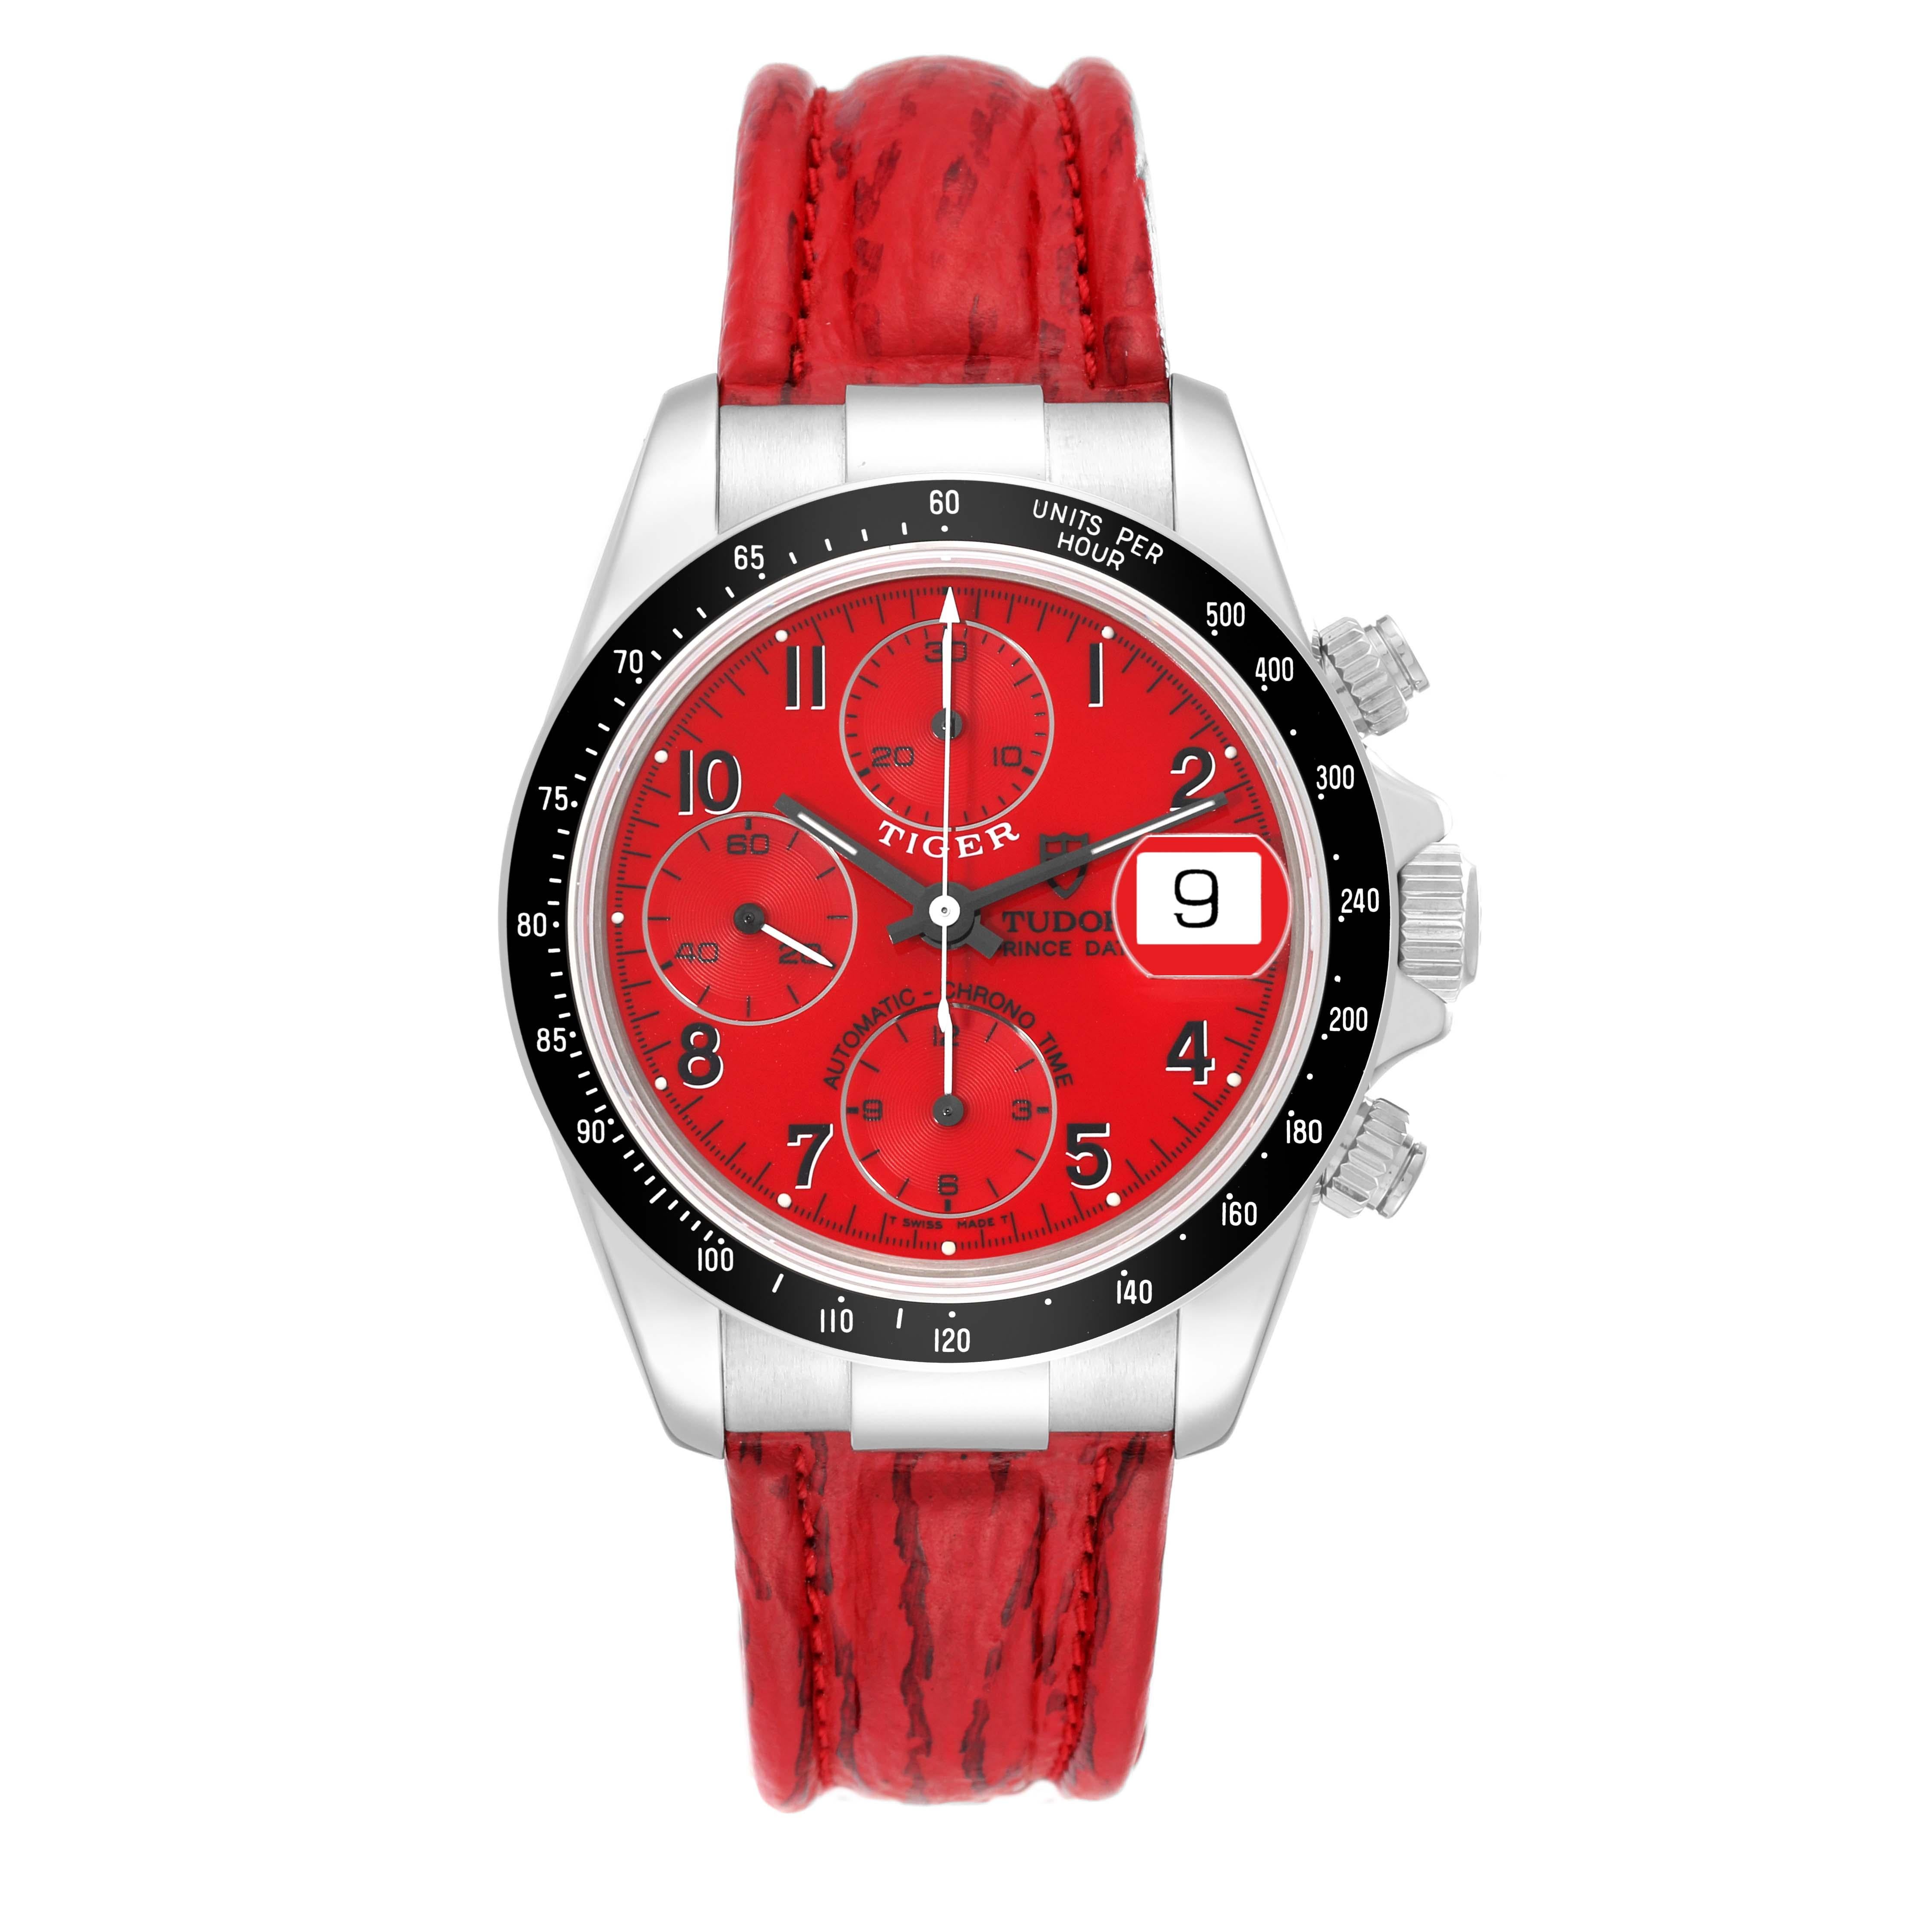 Tudor Tiger Woods Prince Date Red Dial Leather Strap Steel Mens Watch 79260. Automatic self-winding movement with chronograph function. Stainless steel oyster case 40.0 mm in diameter. Tudor logo on the crown. Black tachymeter bezel. Scratch